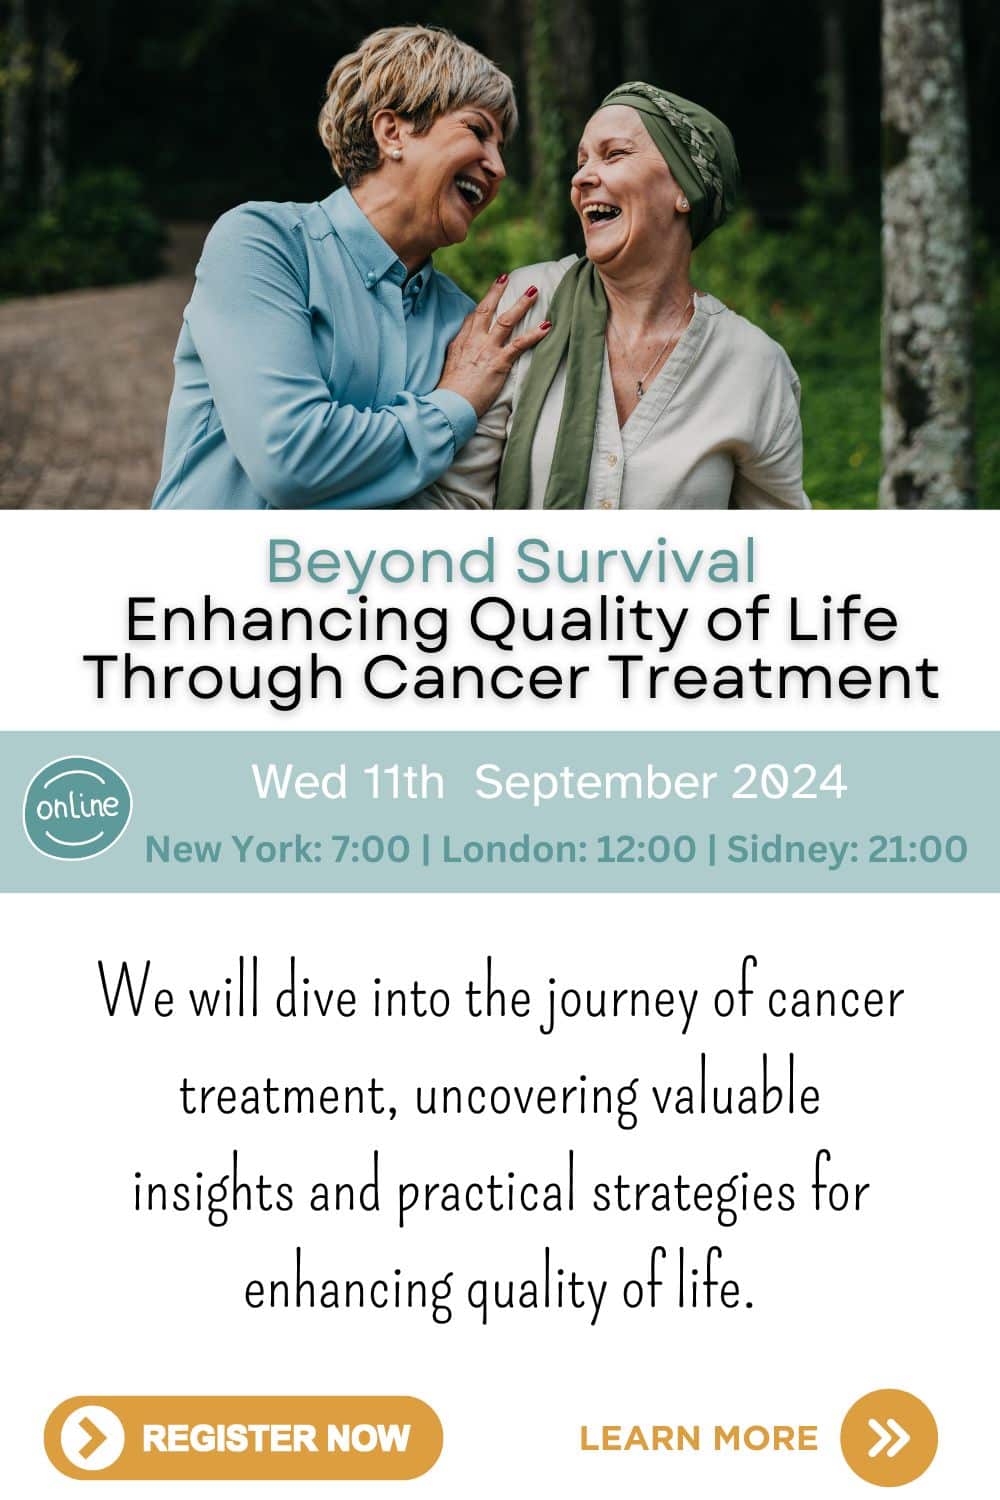 Beyond Survival: Enhancing Quality of Life Through Cancer Treatment